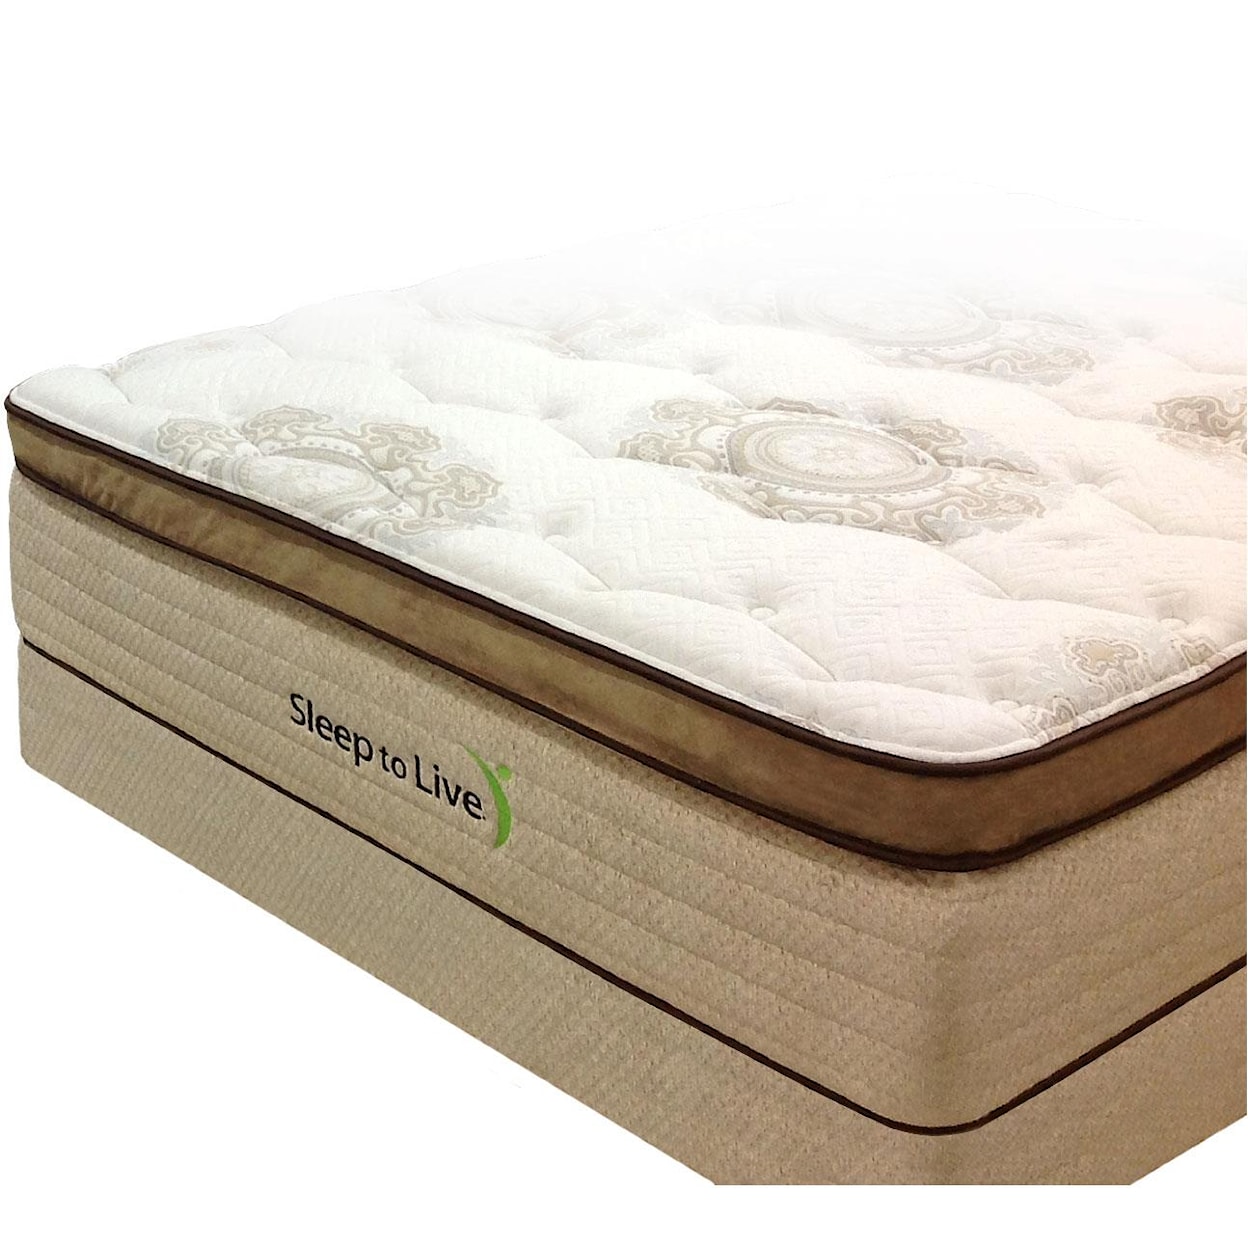 Kingsdown Body System 4 Queen Pocketed Coil Mattress Set